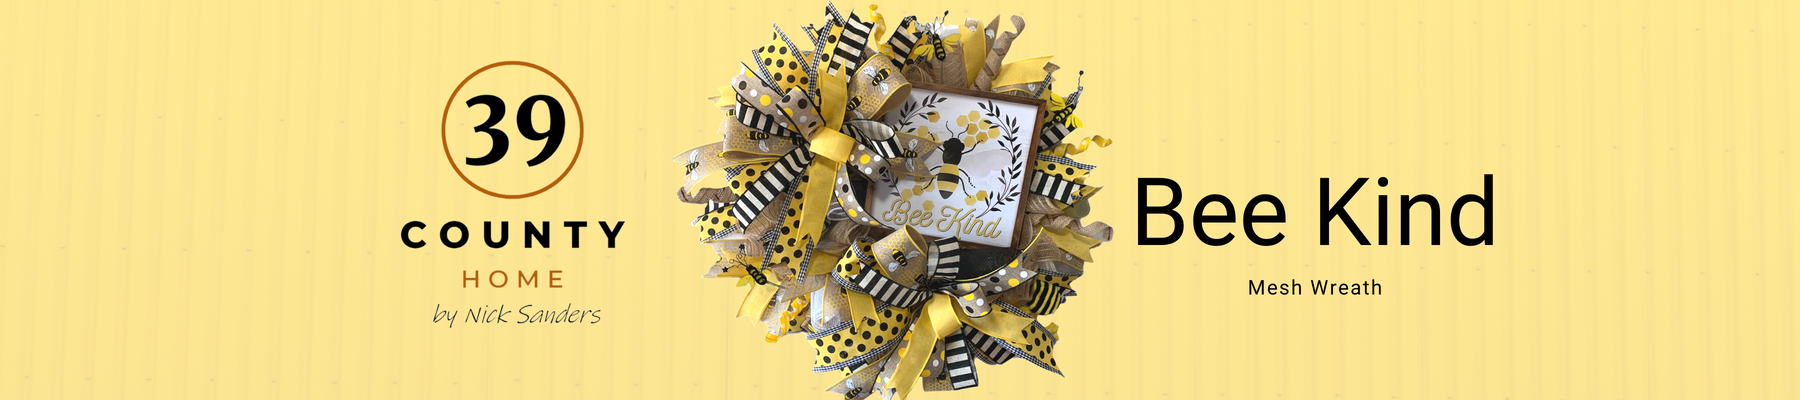 Bee Kind Summer Wreath by 39 County Home